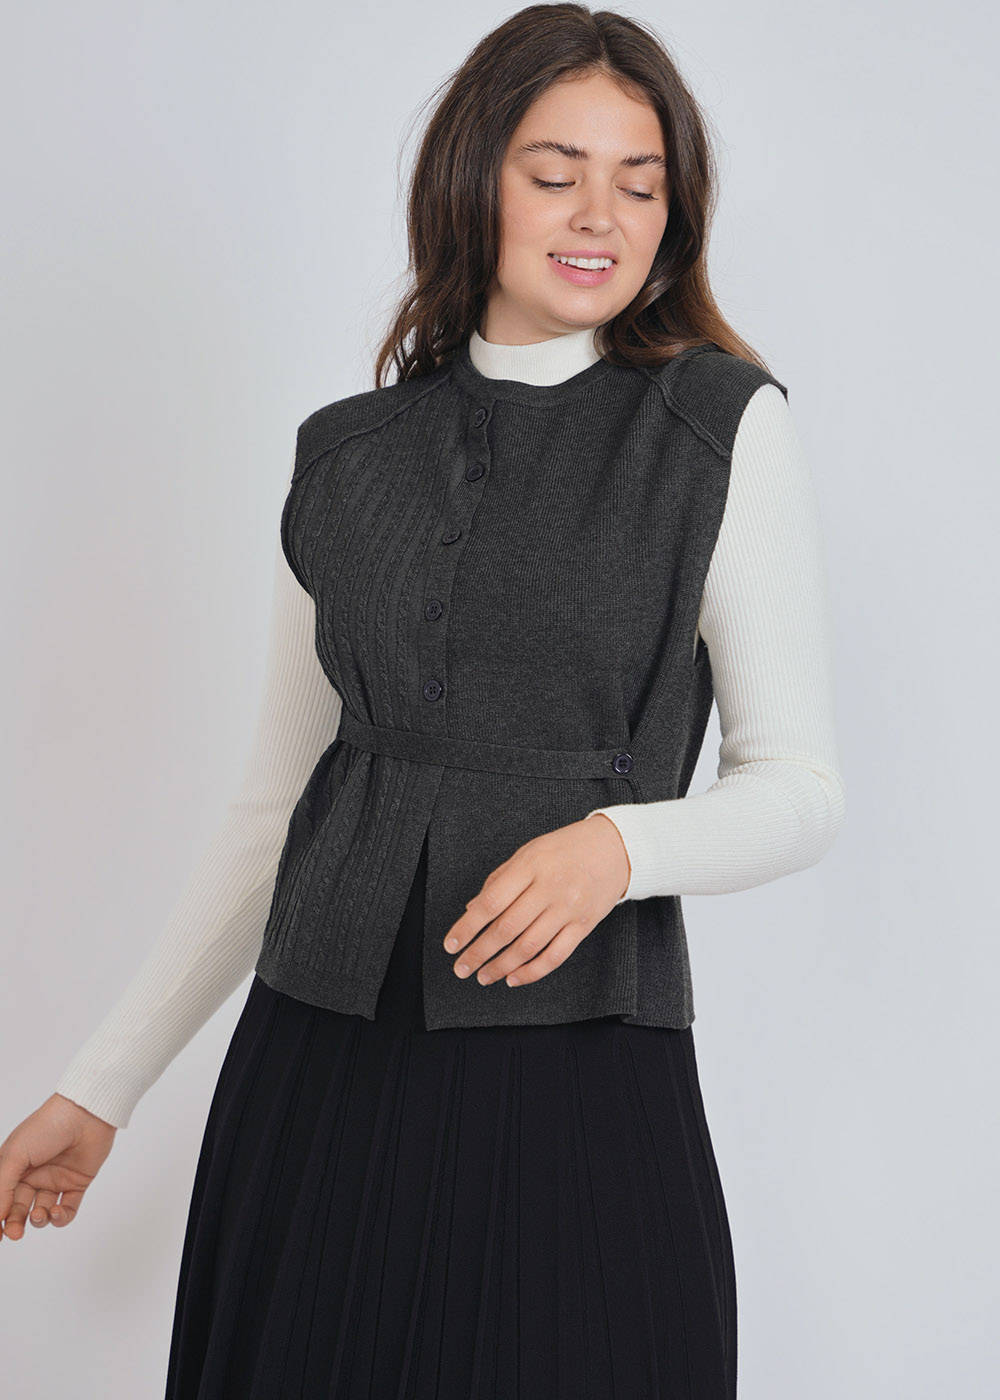 Subtle Grey Vest with Cable Knit Intricacies